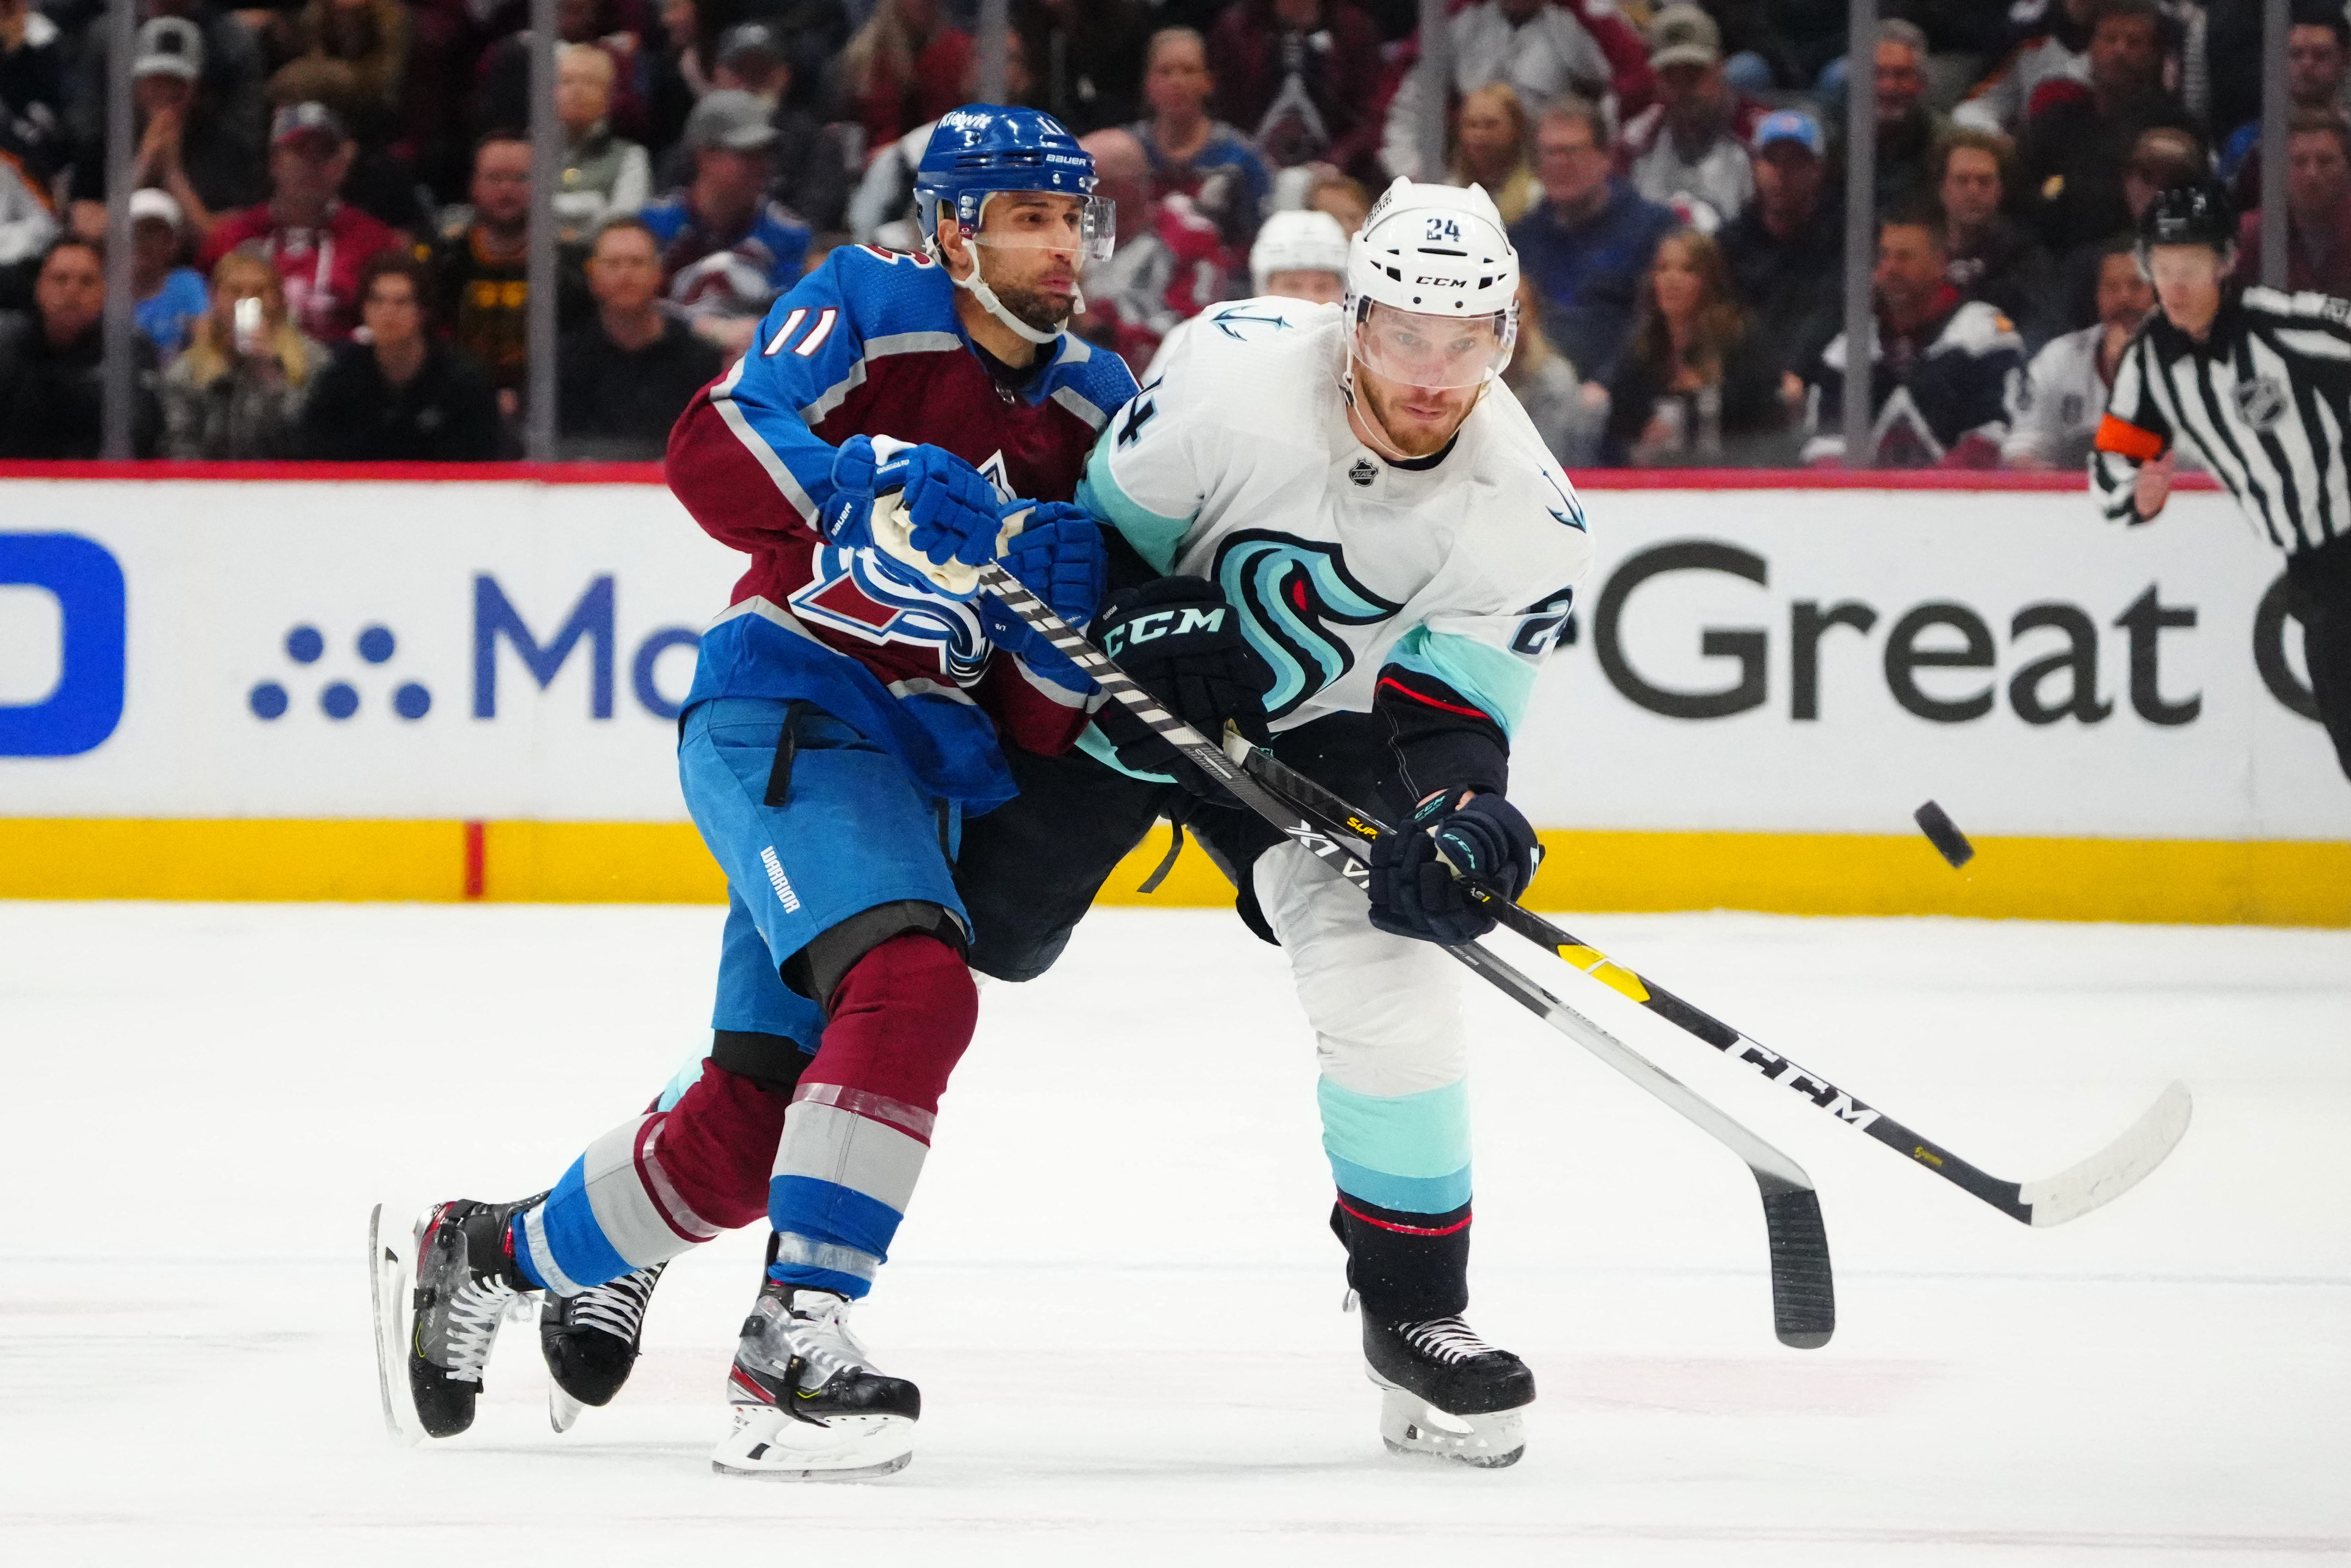 Colorado Avalanche forward Valeri Nichushkin out for 'personal reasons